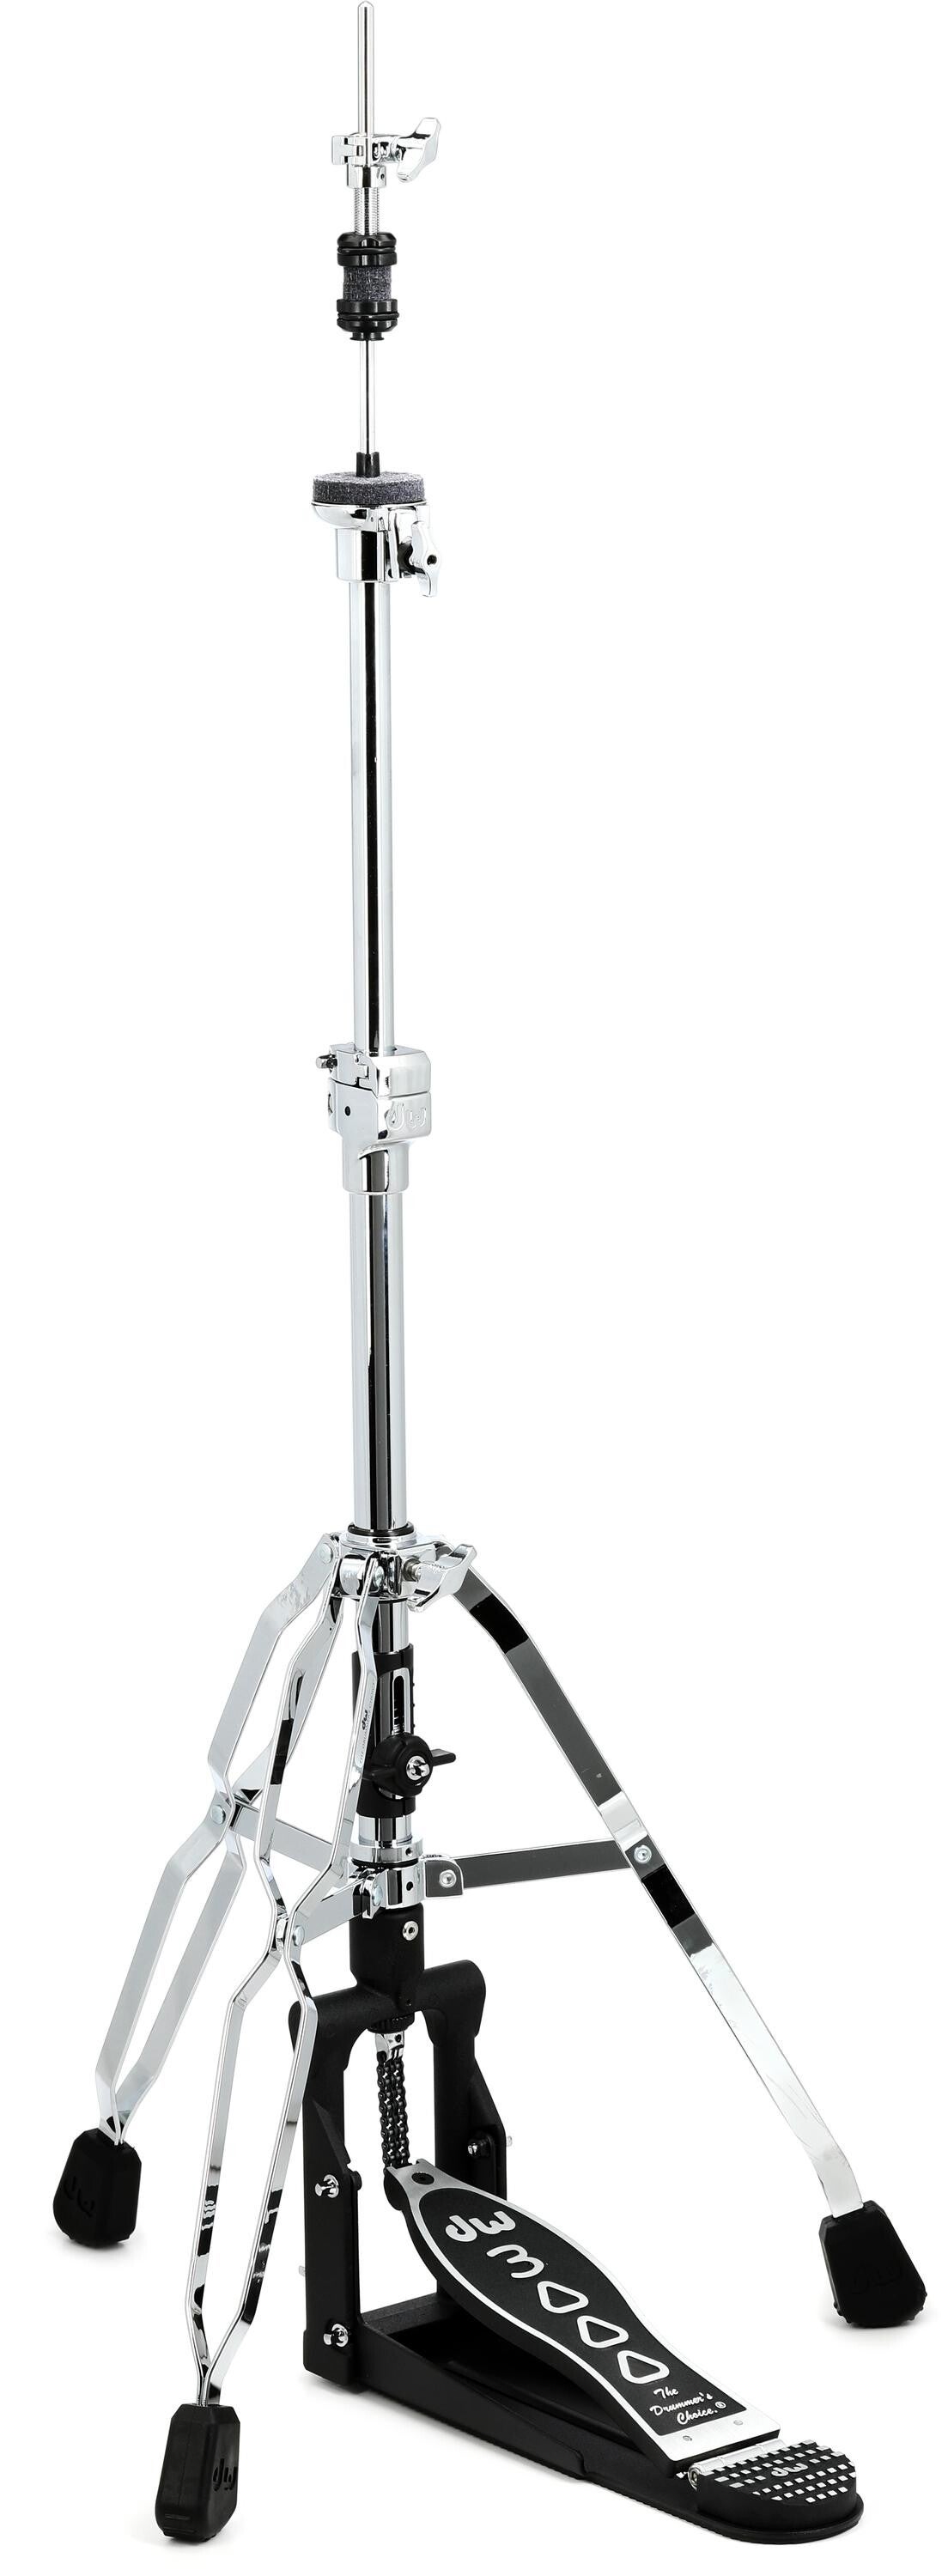 3000　Hi-hat　DW　Stand　3-leg　DWCP3500A　Series　Sweetwater